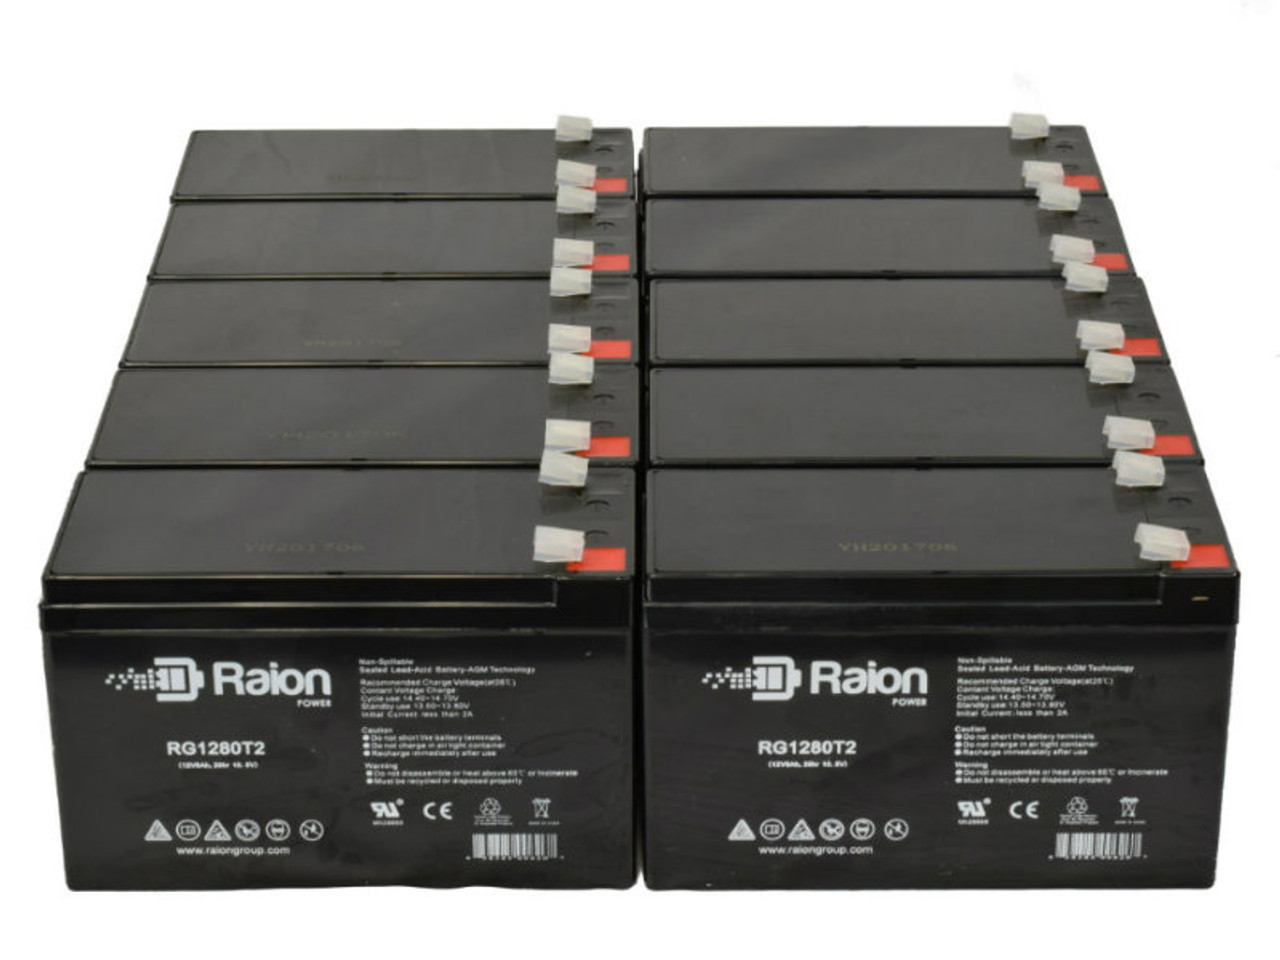 Raion Power Replacement 12V 8Ah RG1280T2 Battery for Medtronic 540 Blood Pump - 10 Pack